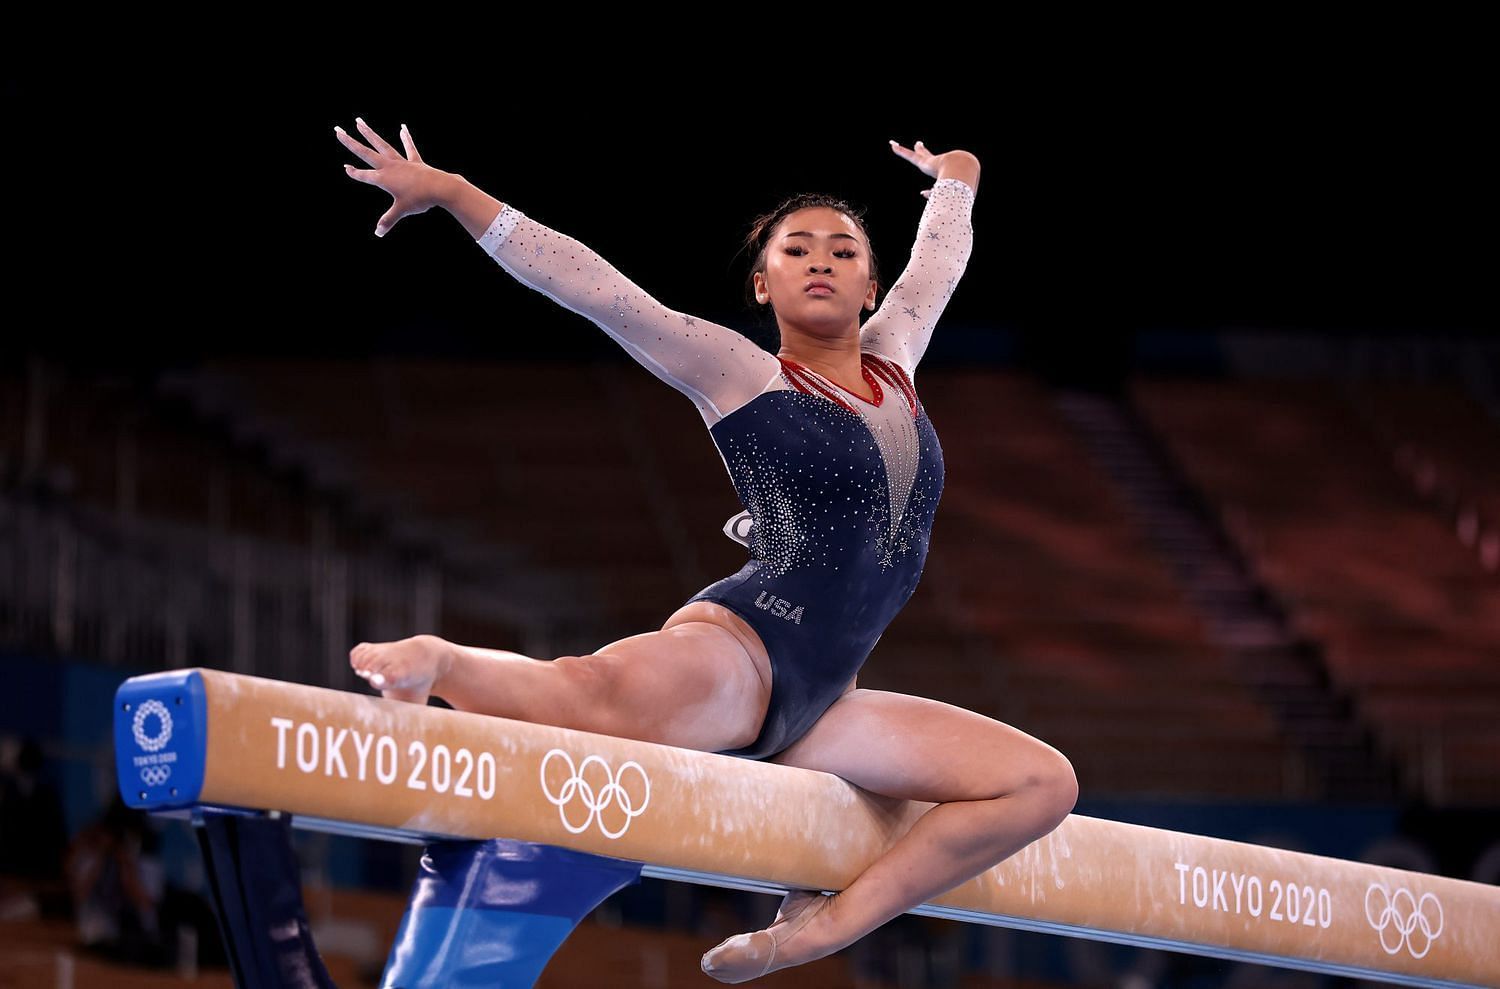 Sunisa Lee at the 2022 Tokyo Olypics (image credit: getty images)